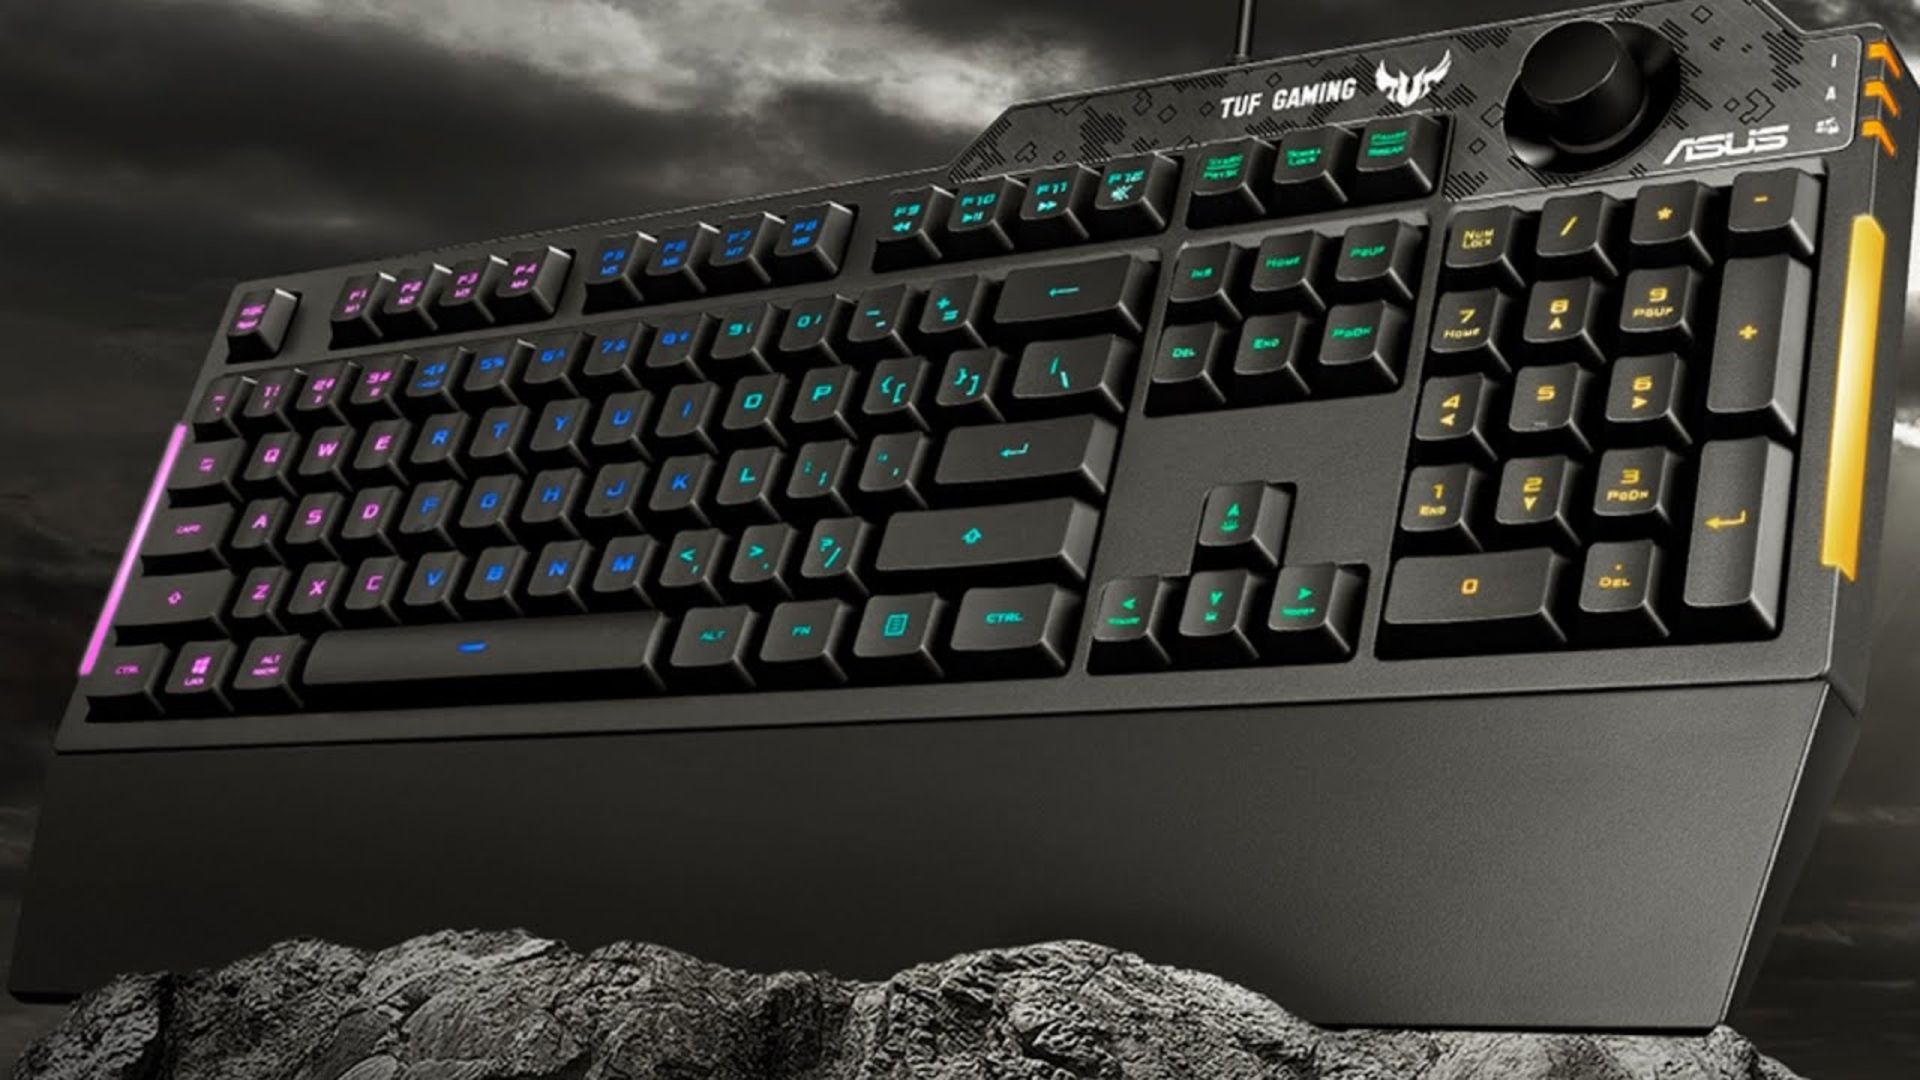 1 x Asus TUF K1 RGB Gaming Keyboard - Brand New and Boxed - Features Volume Control, Side Light - Image 6 of 8